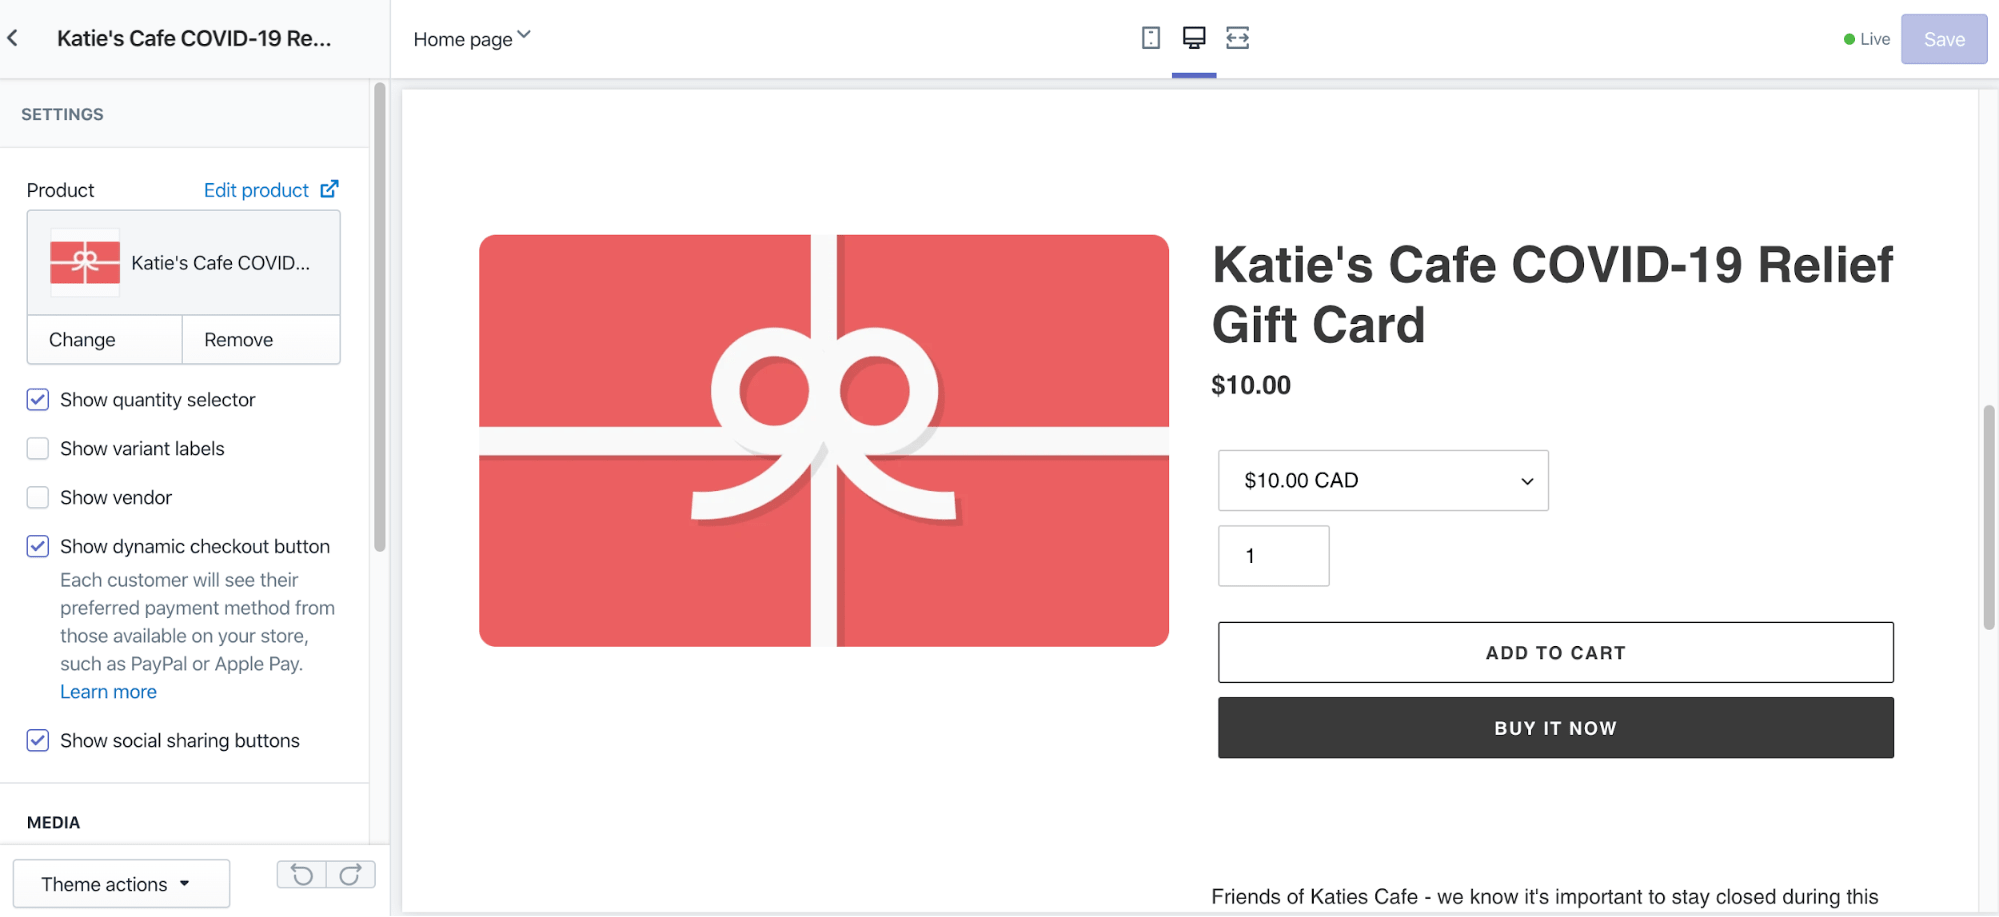 adding a gift card as a featured product